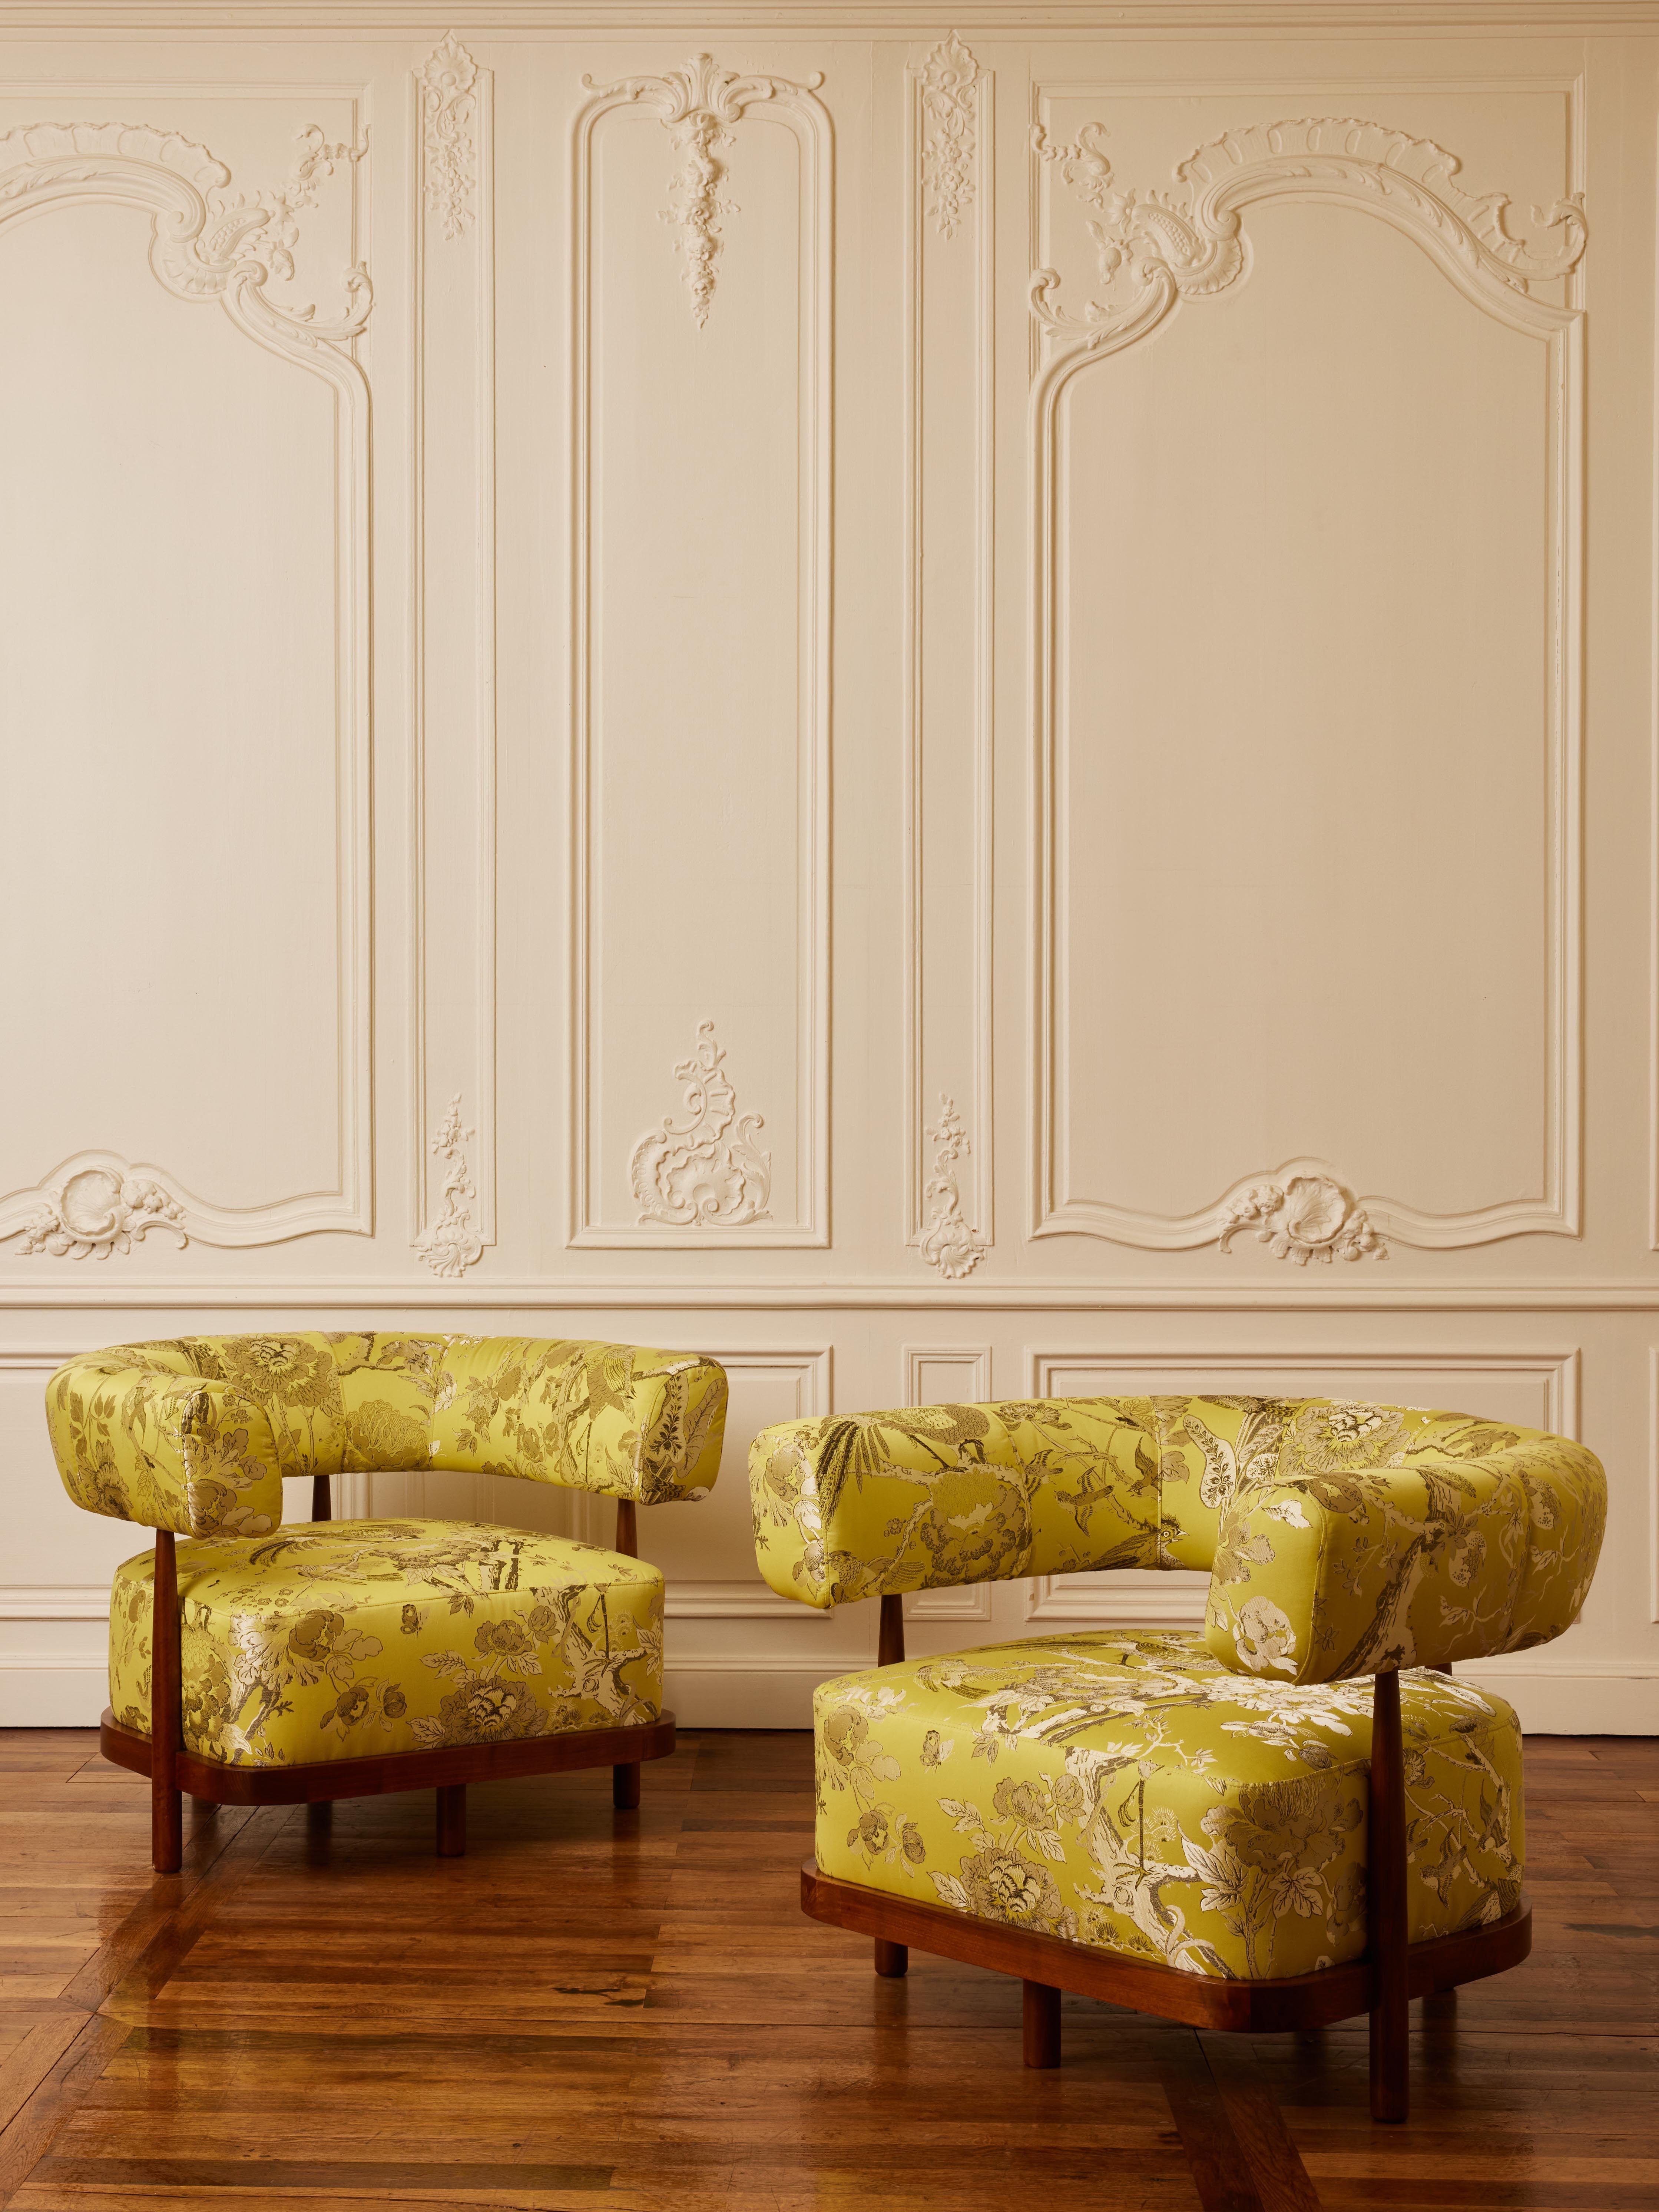 Pair of wooden armchairs with custom reupholstered with a fabric by Dédar.
Creation by Studio Glustin.